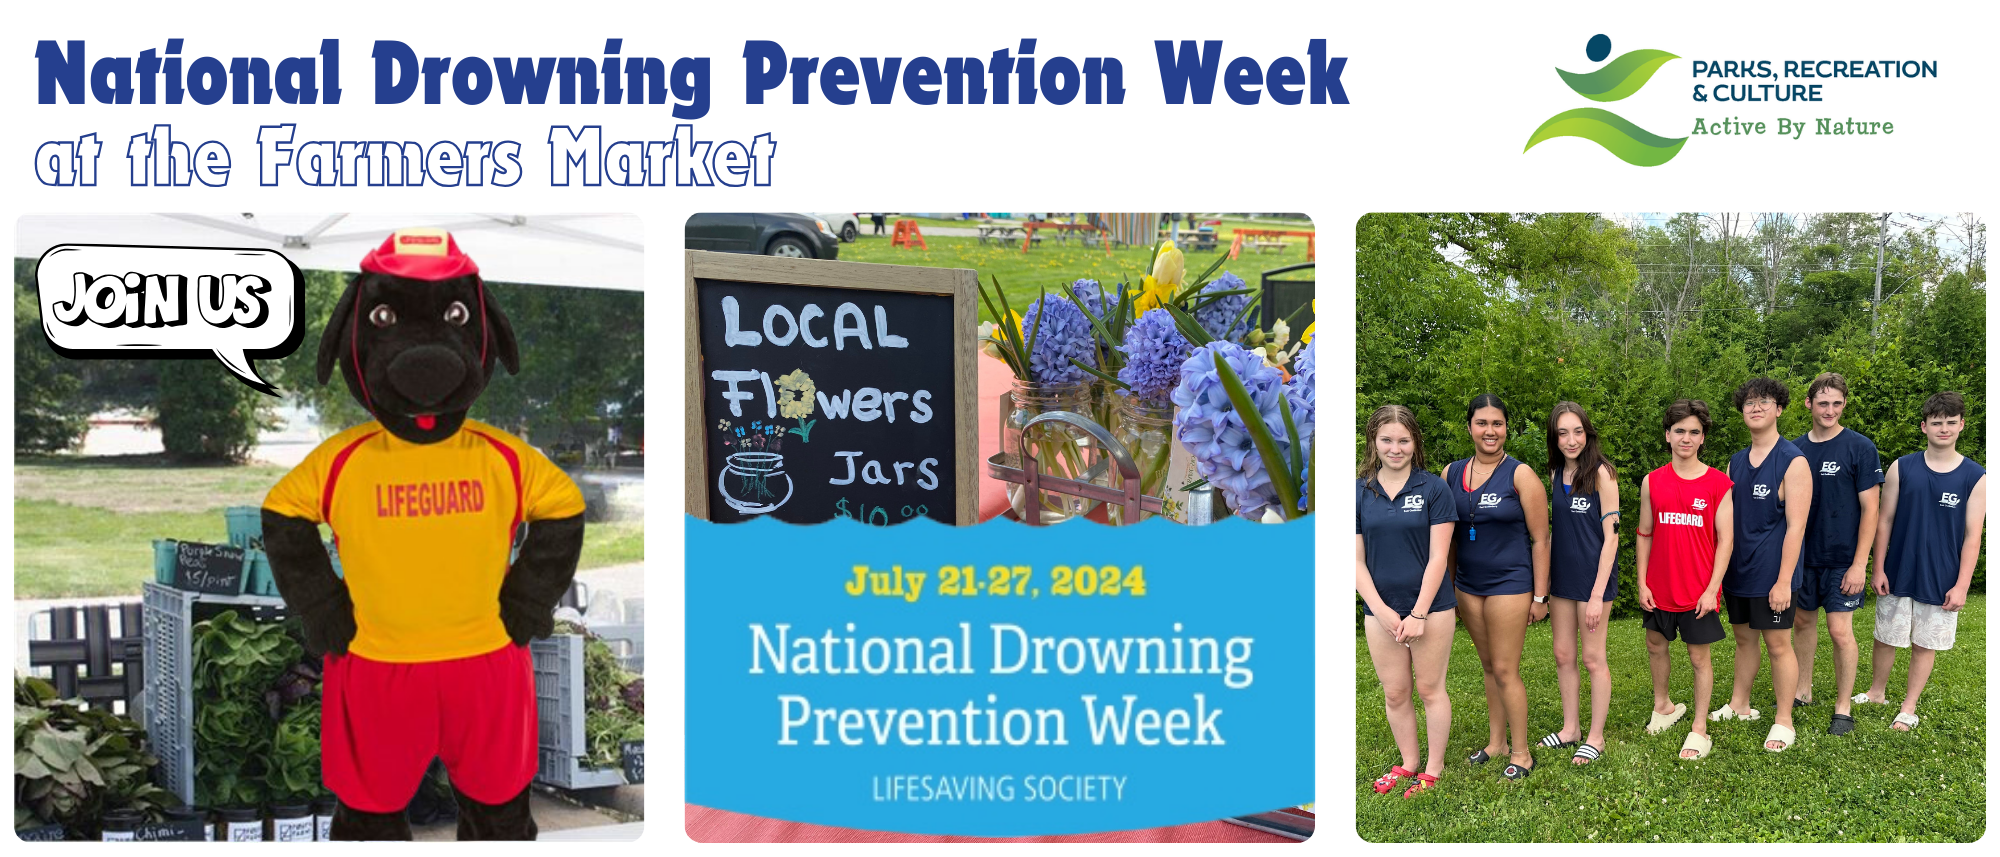 National Drowning Prevention Week Images 